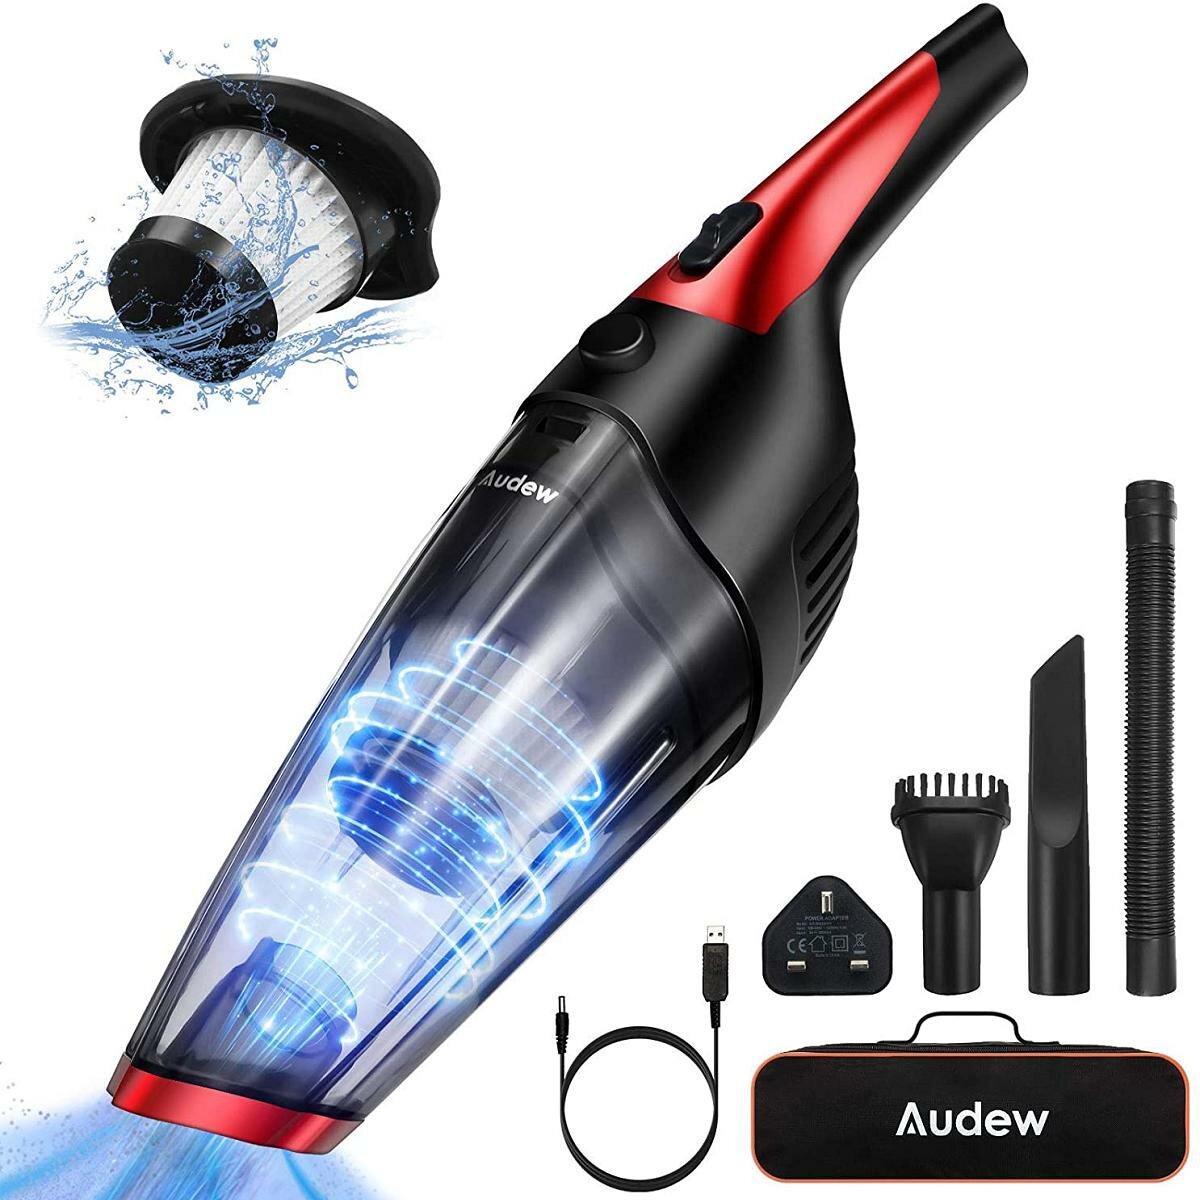 Image of Audew 7000Pa Wireless Handheld Car Cleaning Vacuum Cleaner Filter Washable Low Noise Rechargeable Pet Hair